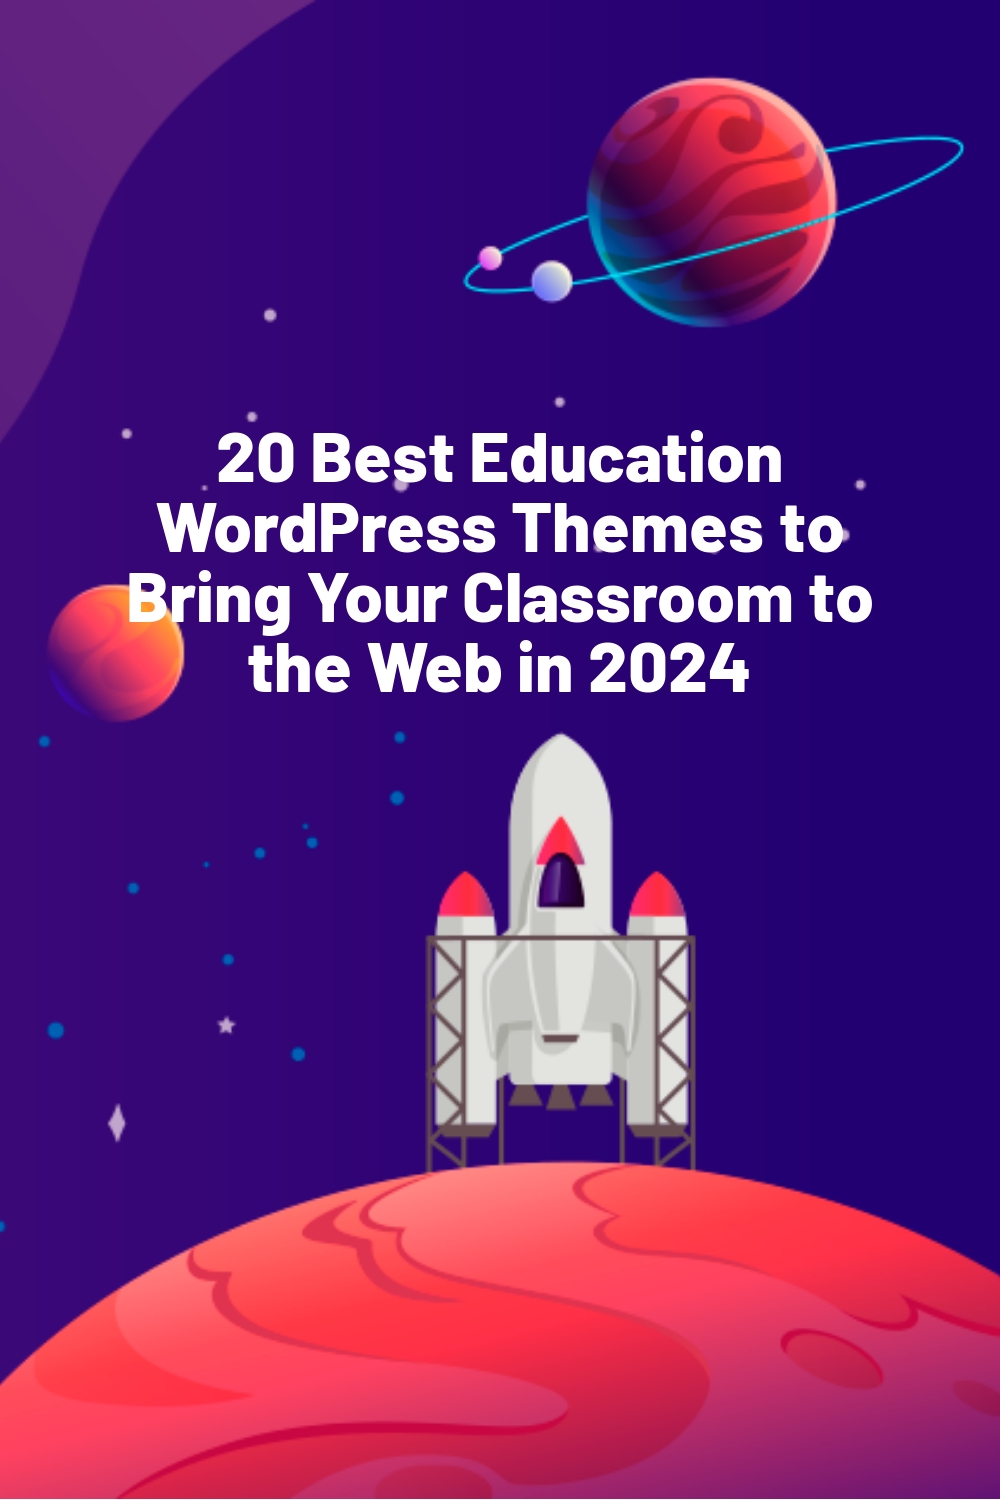 20 Best Education WordPress Themes to Bring Your Classroom to the Web in 2024